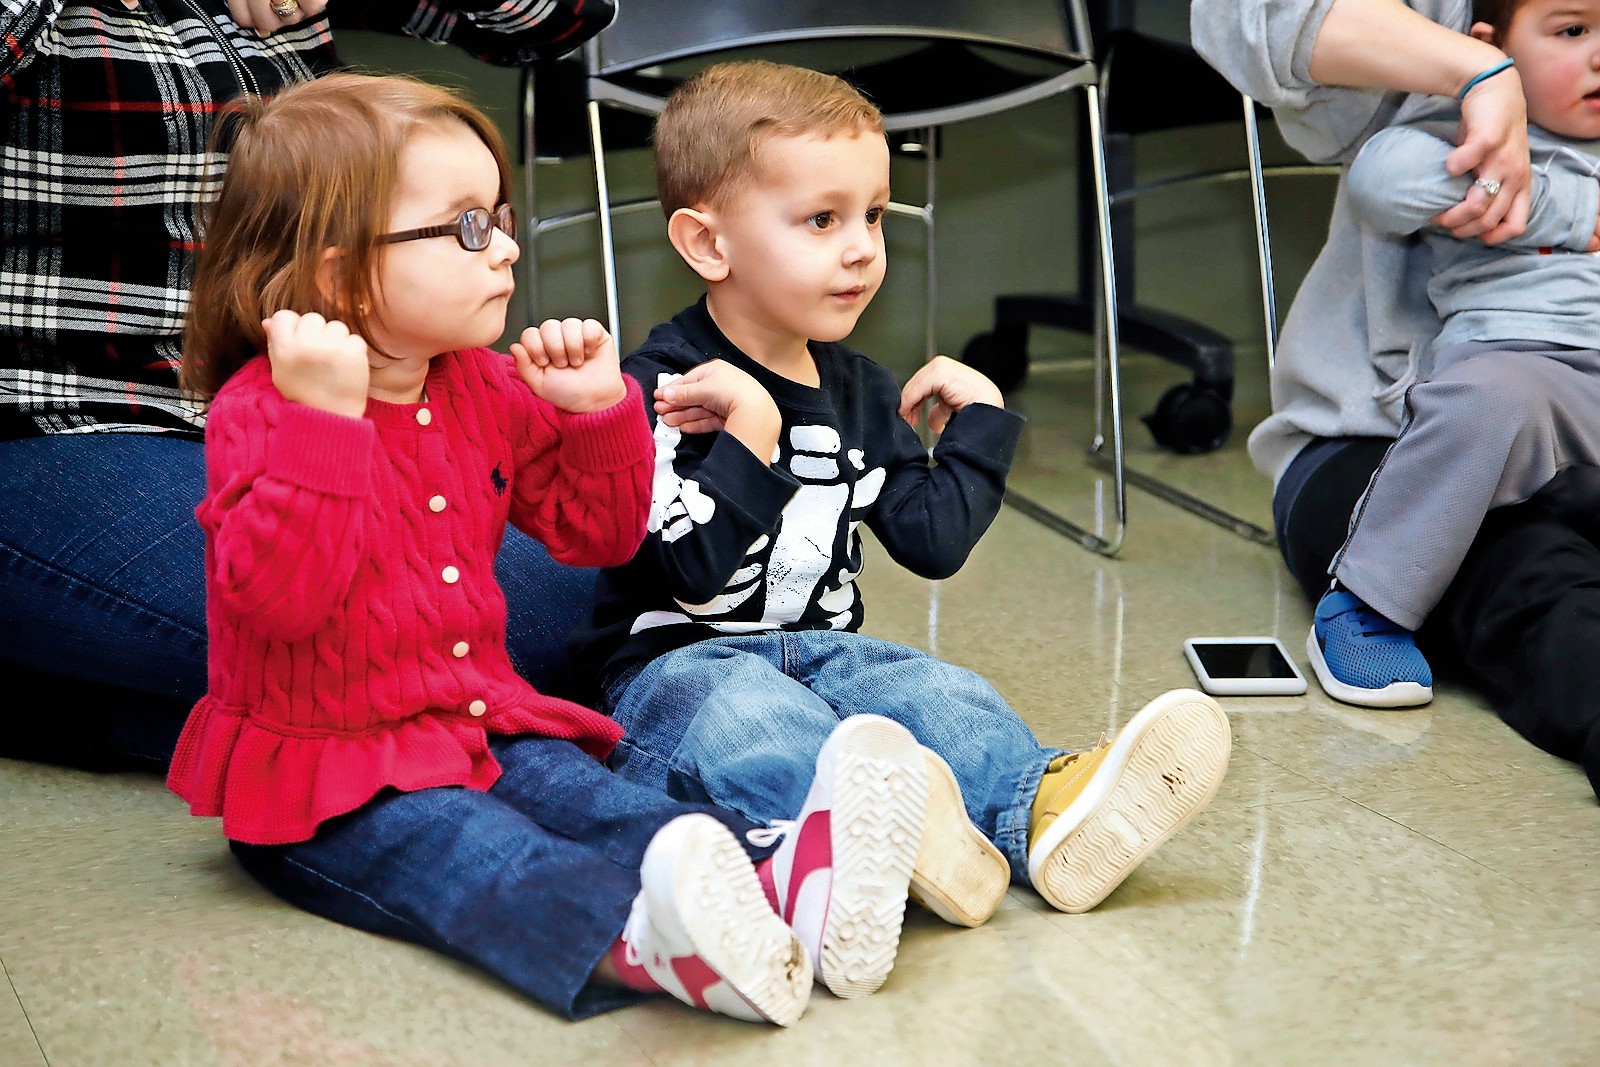 Isabella Rendano, 2, and Joseph Westhoff, 3, participated in Tot Time activities together.